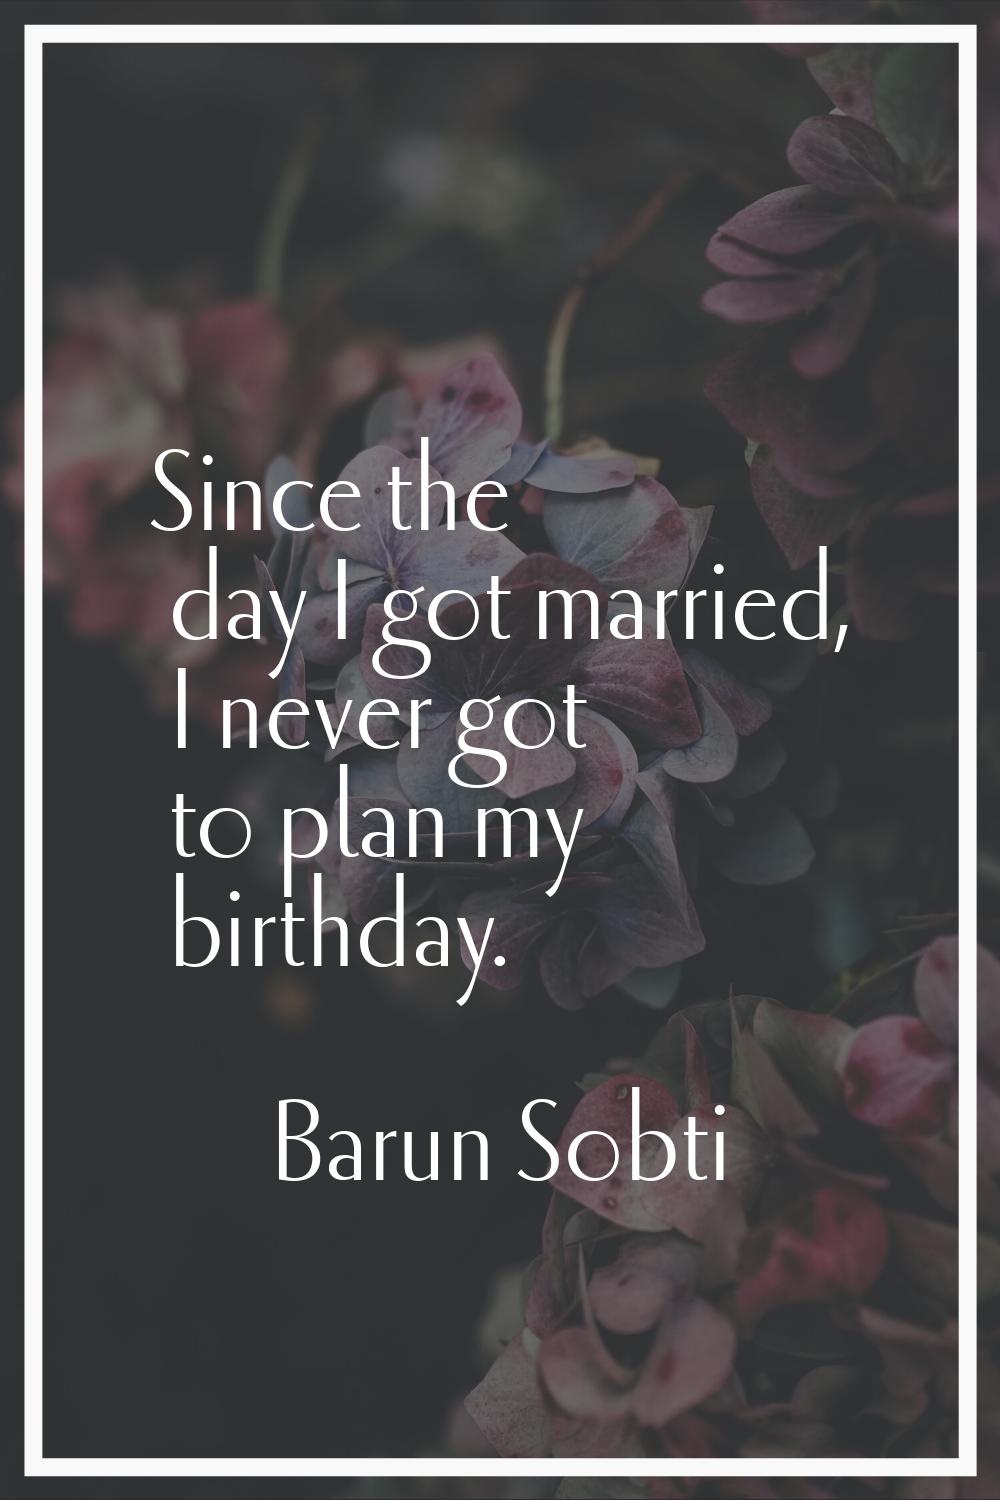 Since the day I got married, I never got to plan my birthday.